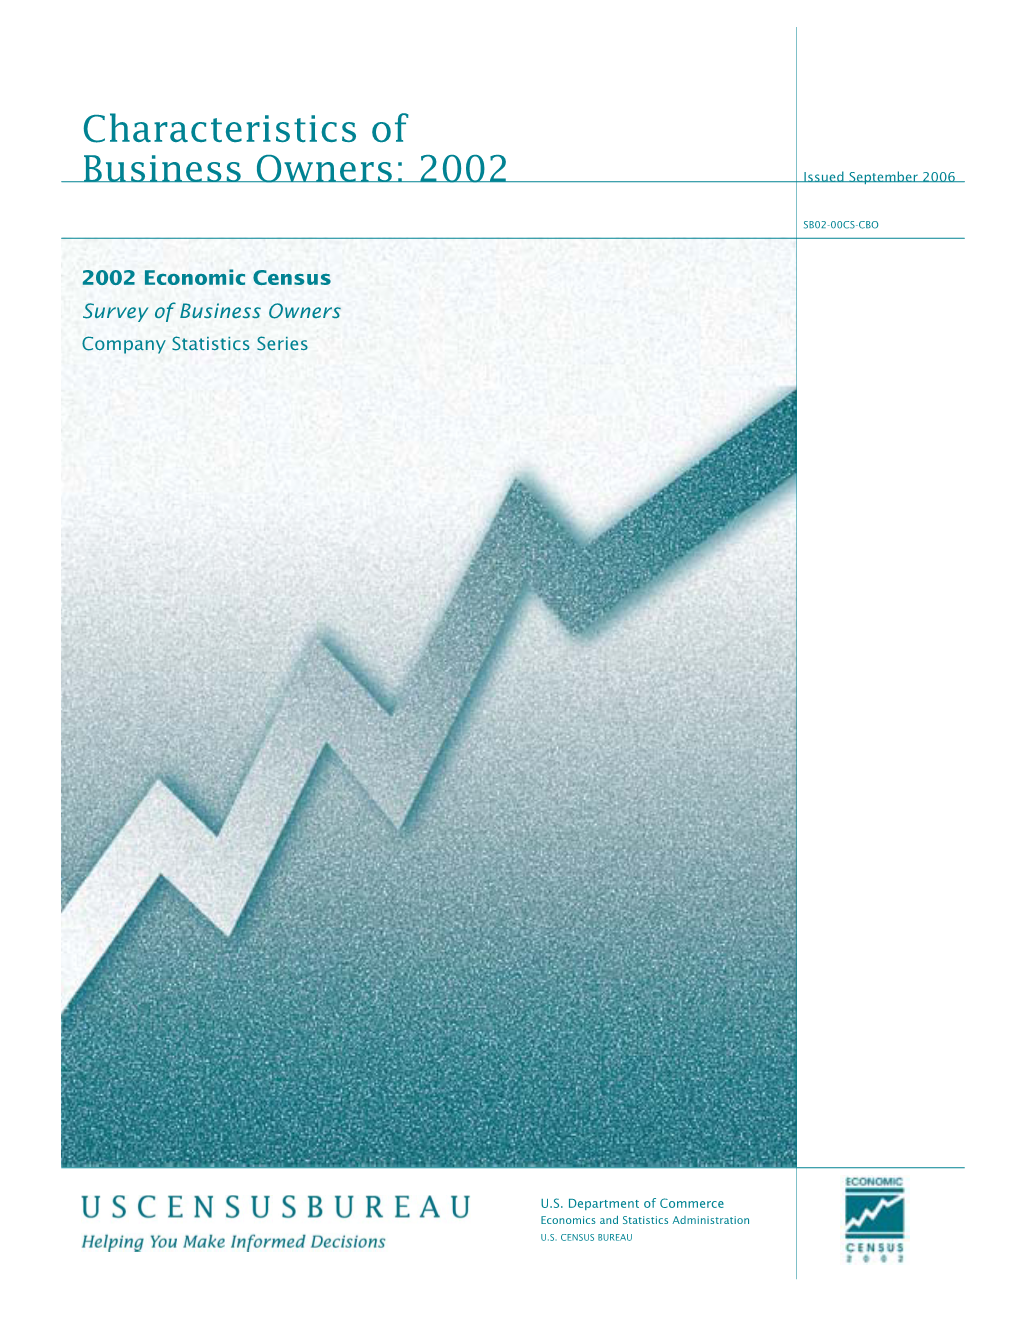 Characteristics of Business Owners:2002